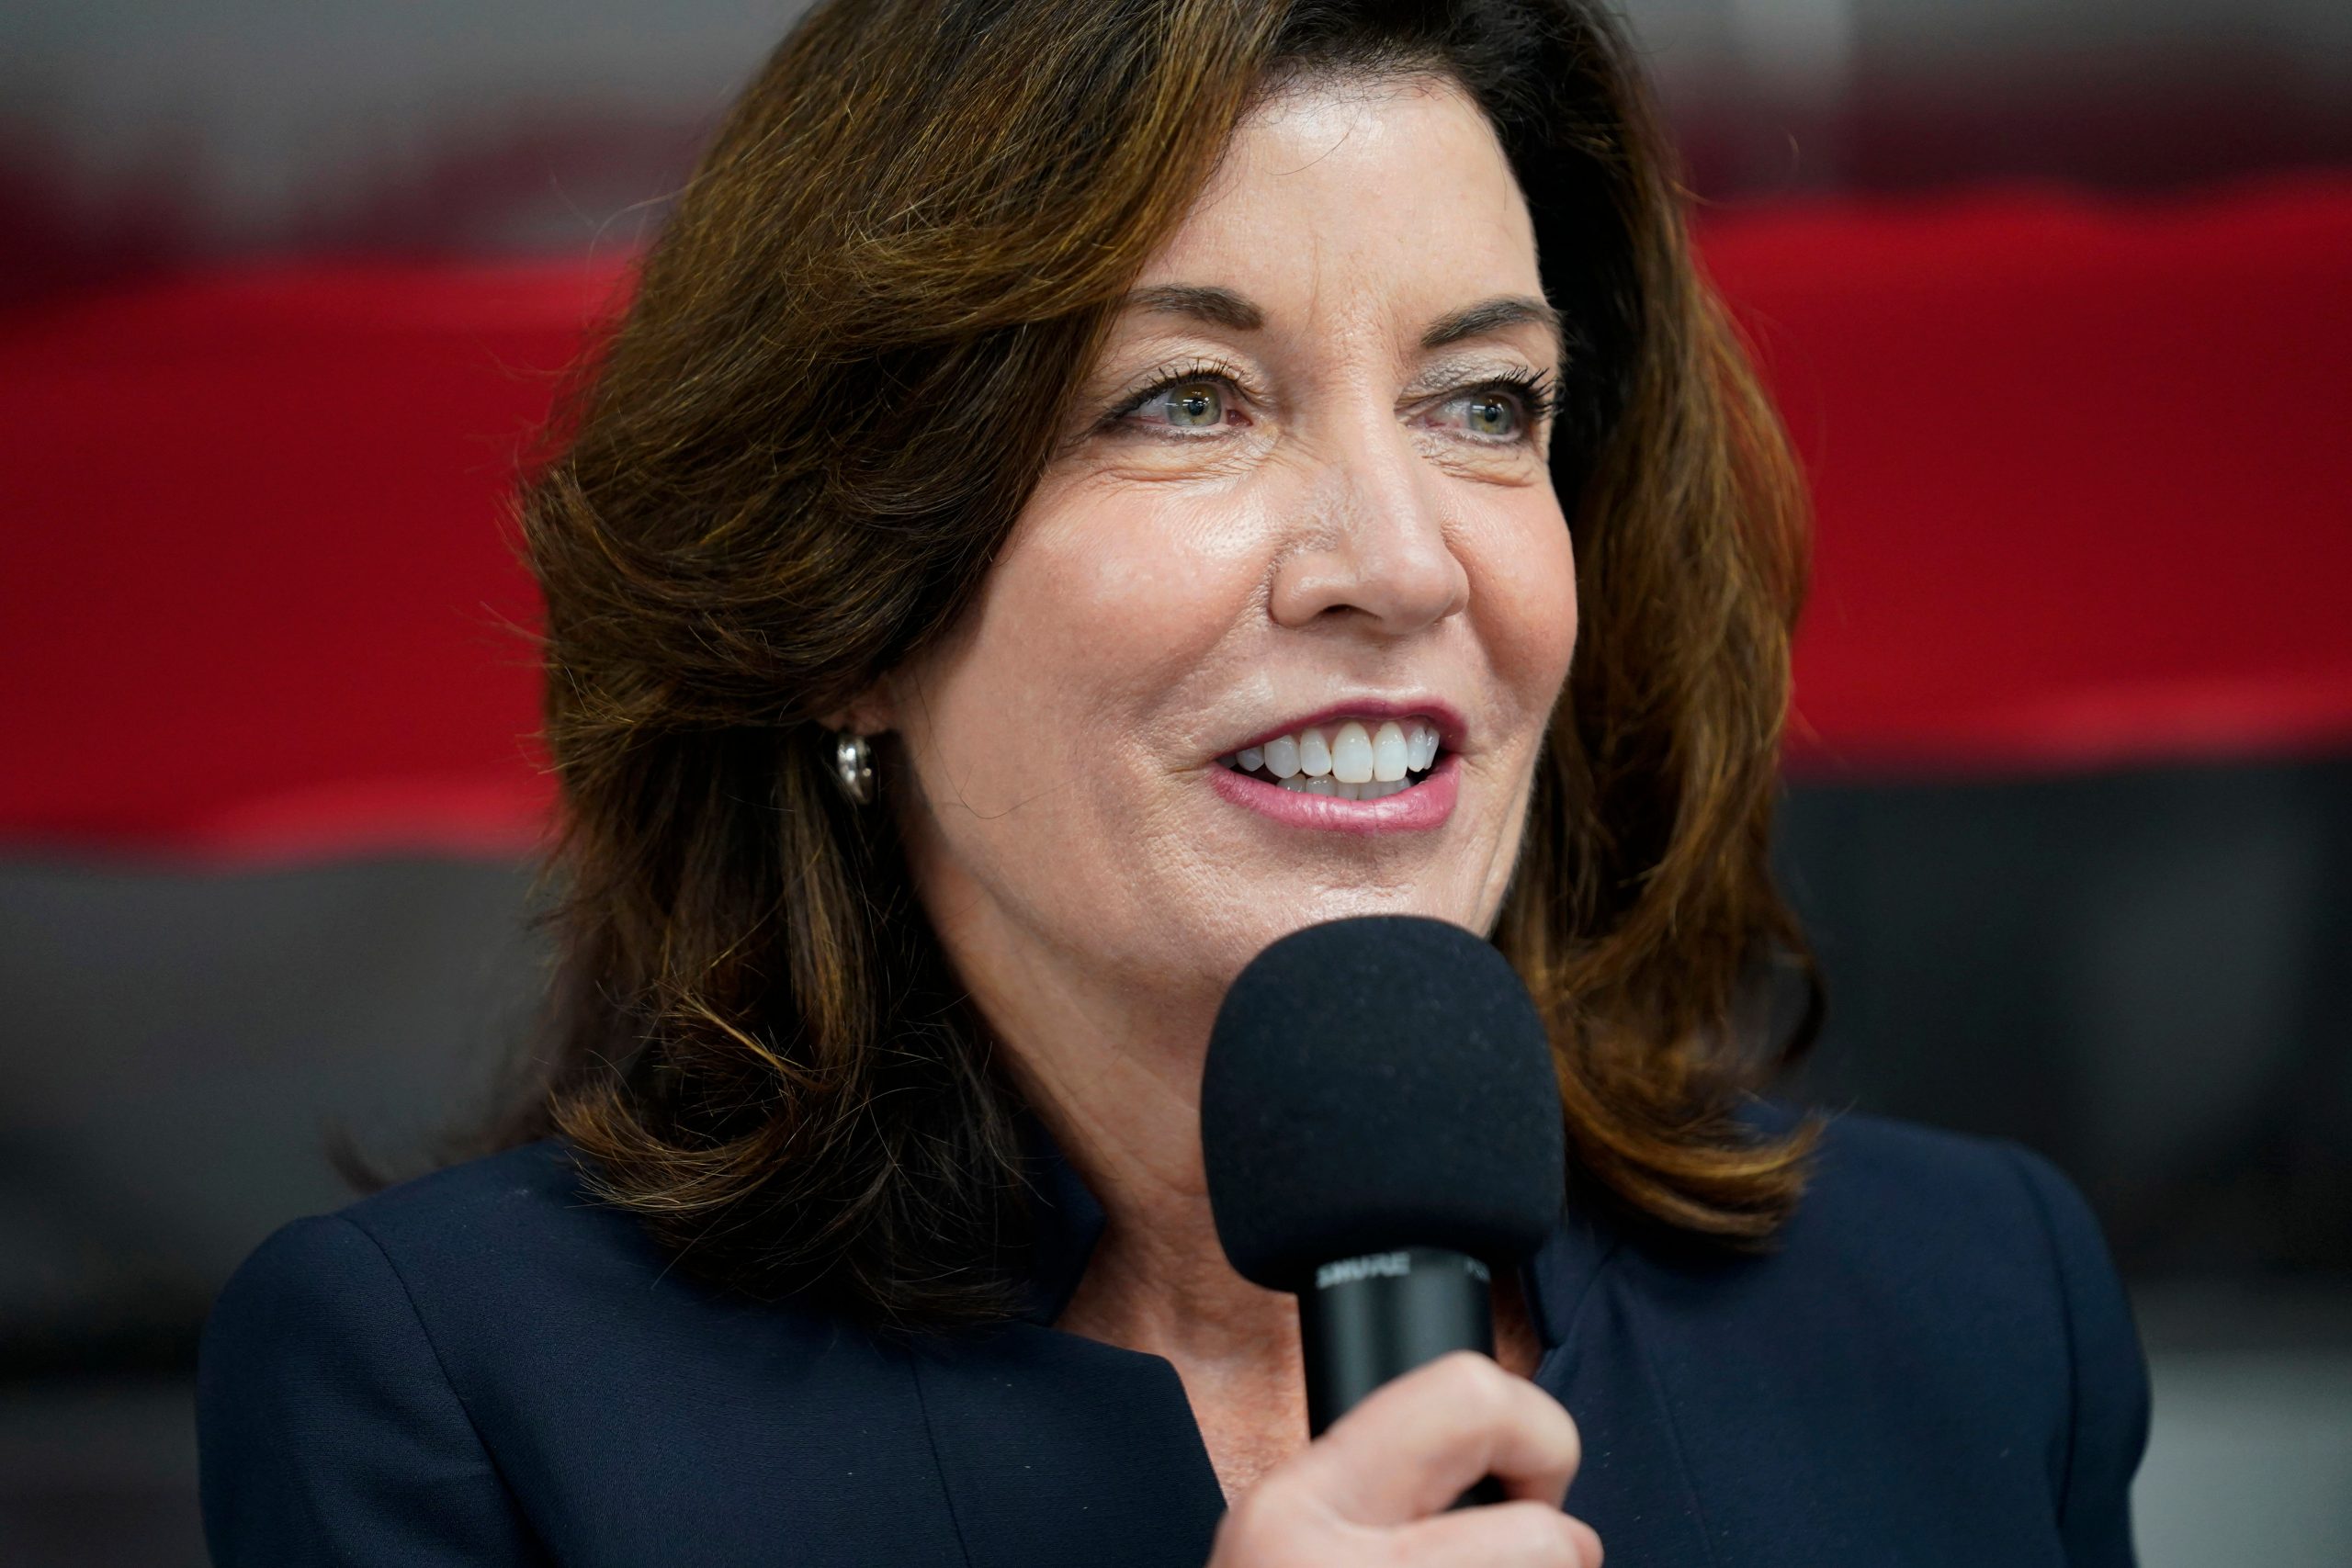 Will set a different tone: Lt. Governor Kathy Hochul on leading New York